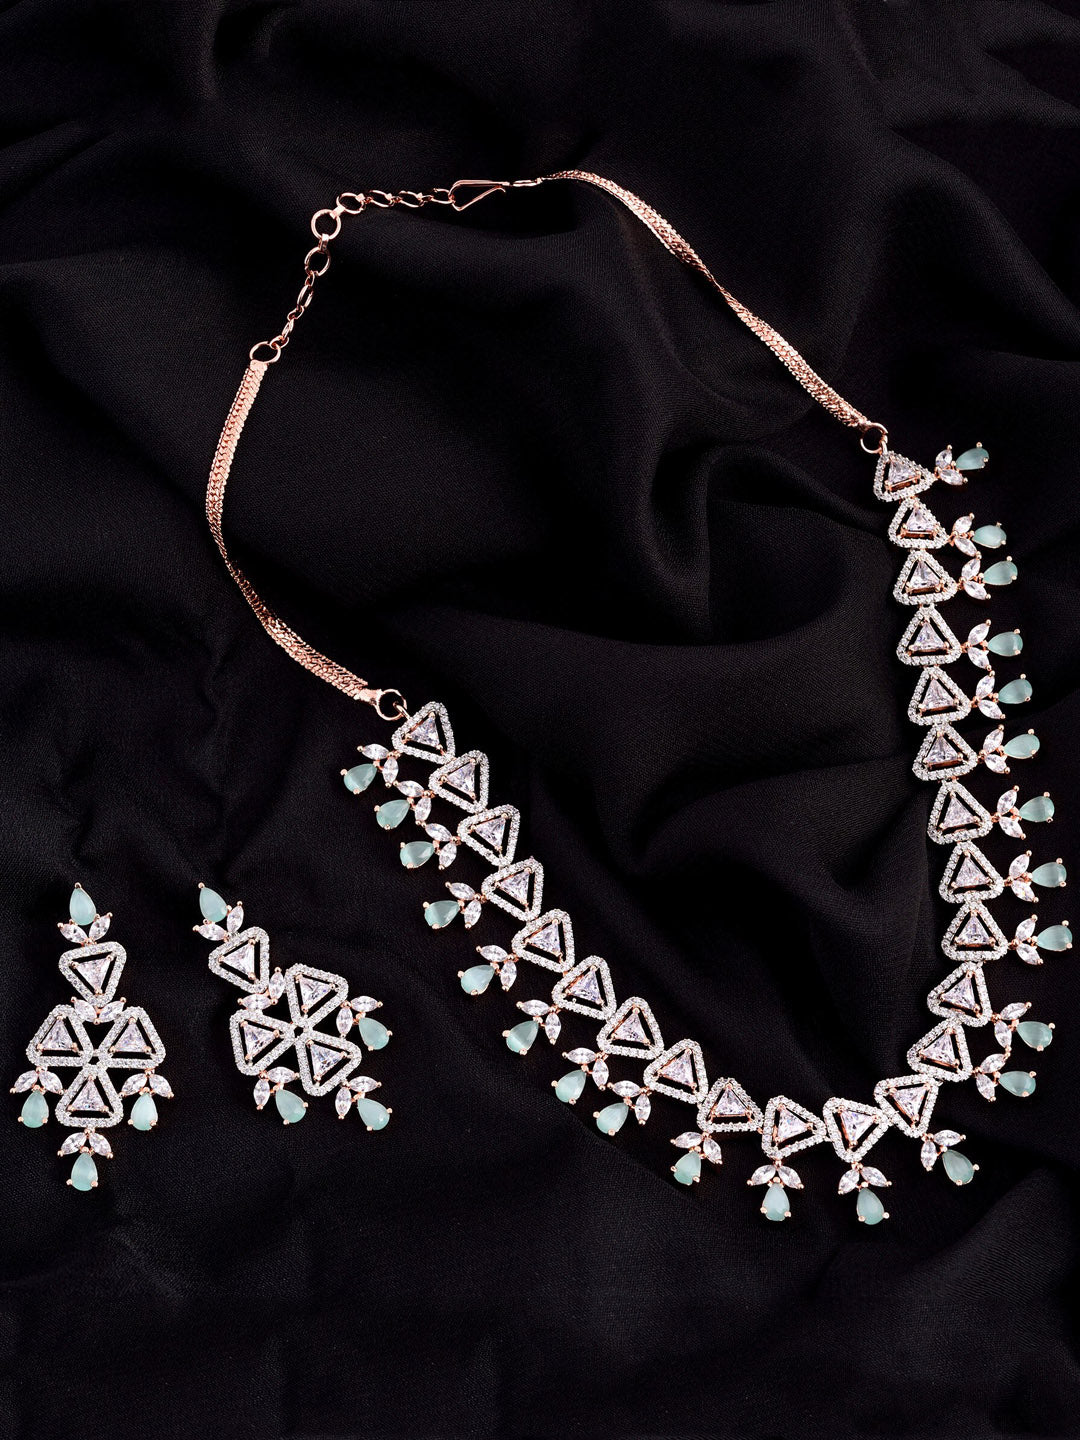 Saraf RS Jewellery Rose Gold-Plated White & Sea Green AD-Studded Handcrafted Jewellery Set - Distacart